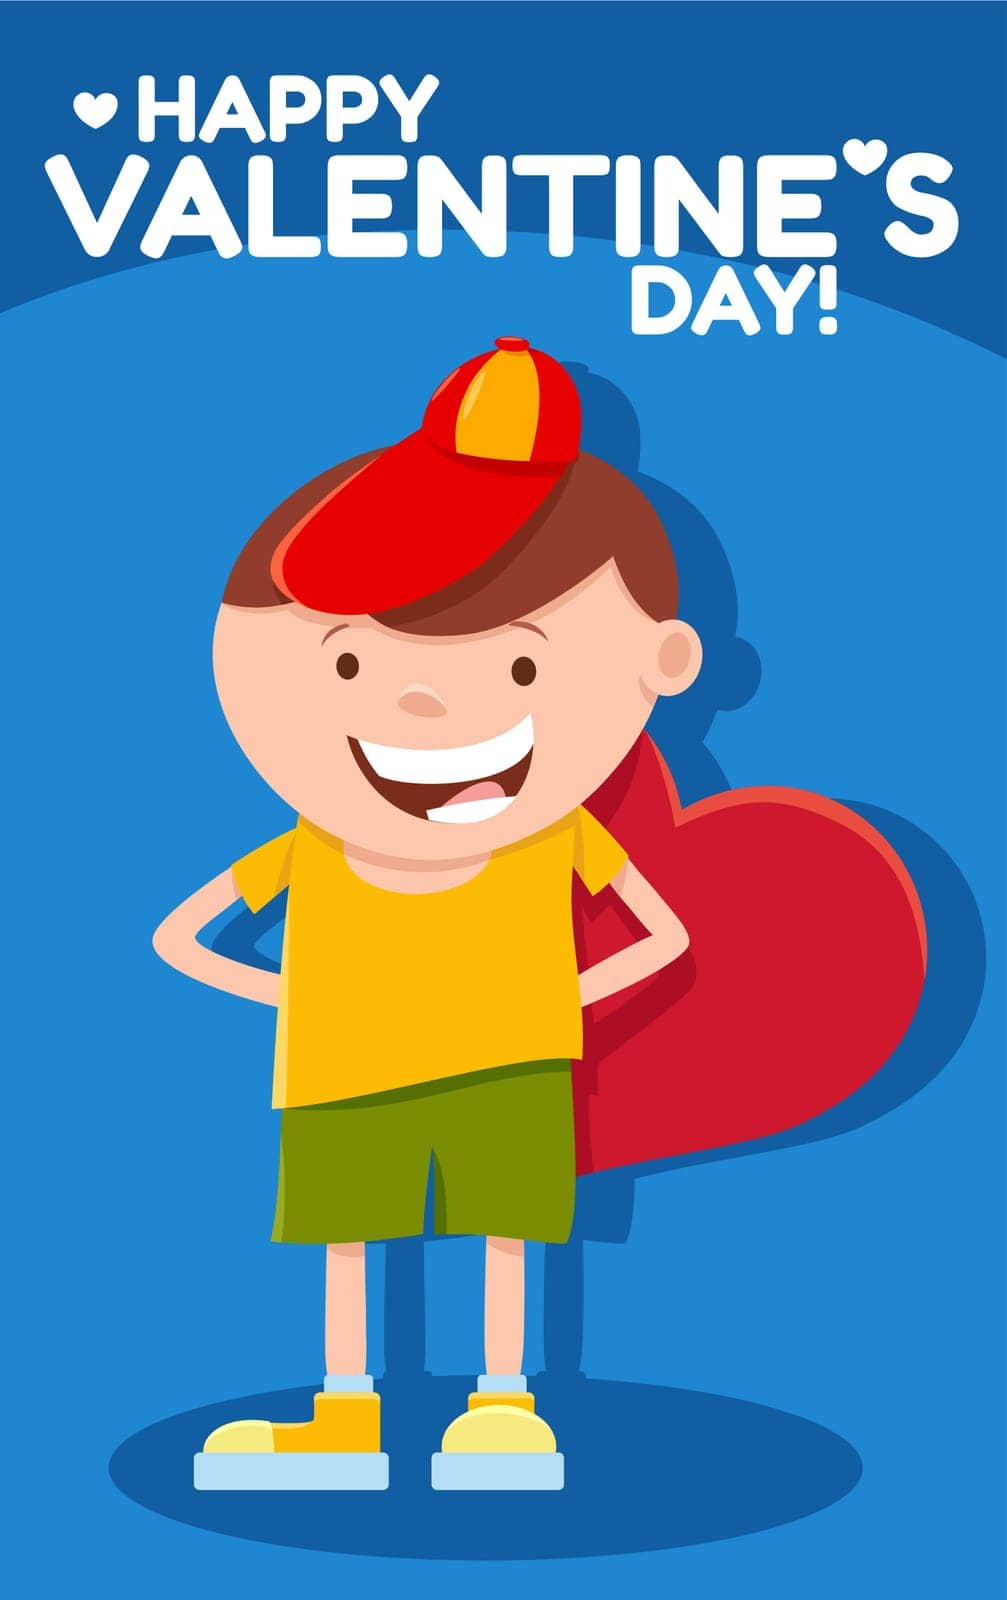 Cartoon illustration with funny boy character with heart Valentines Day card